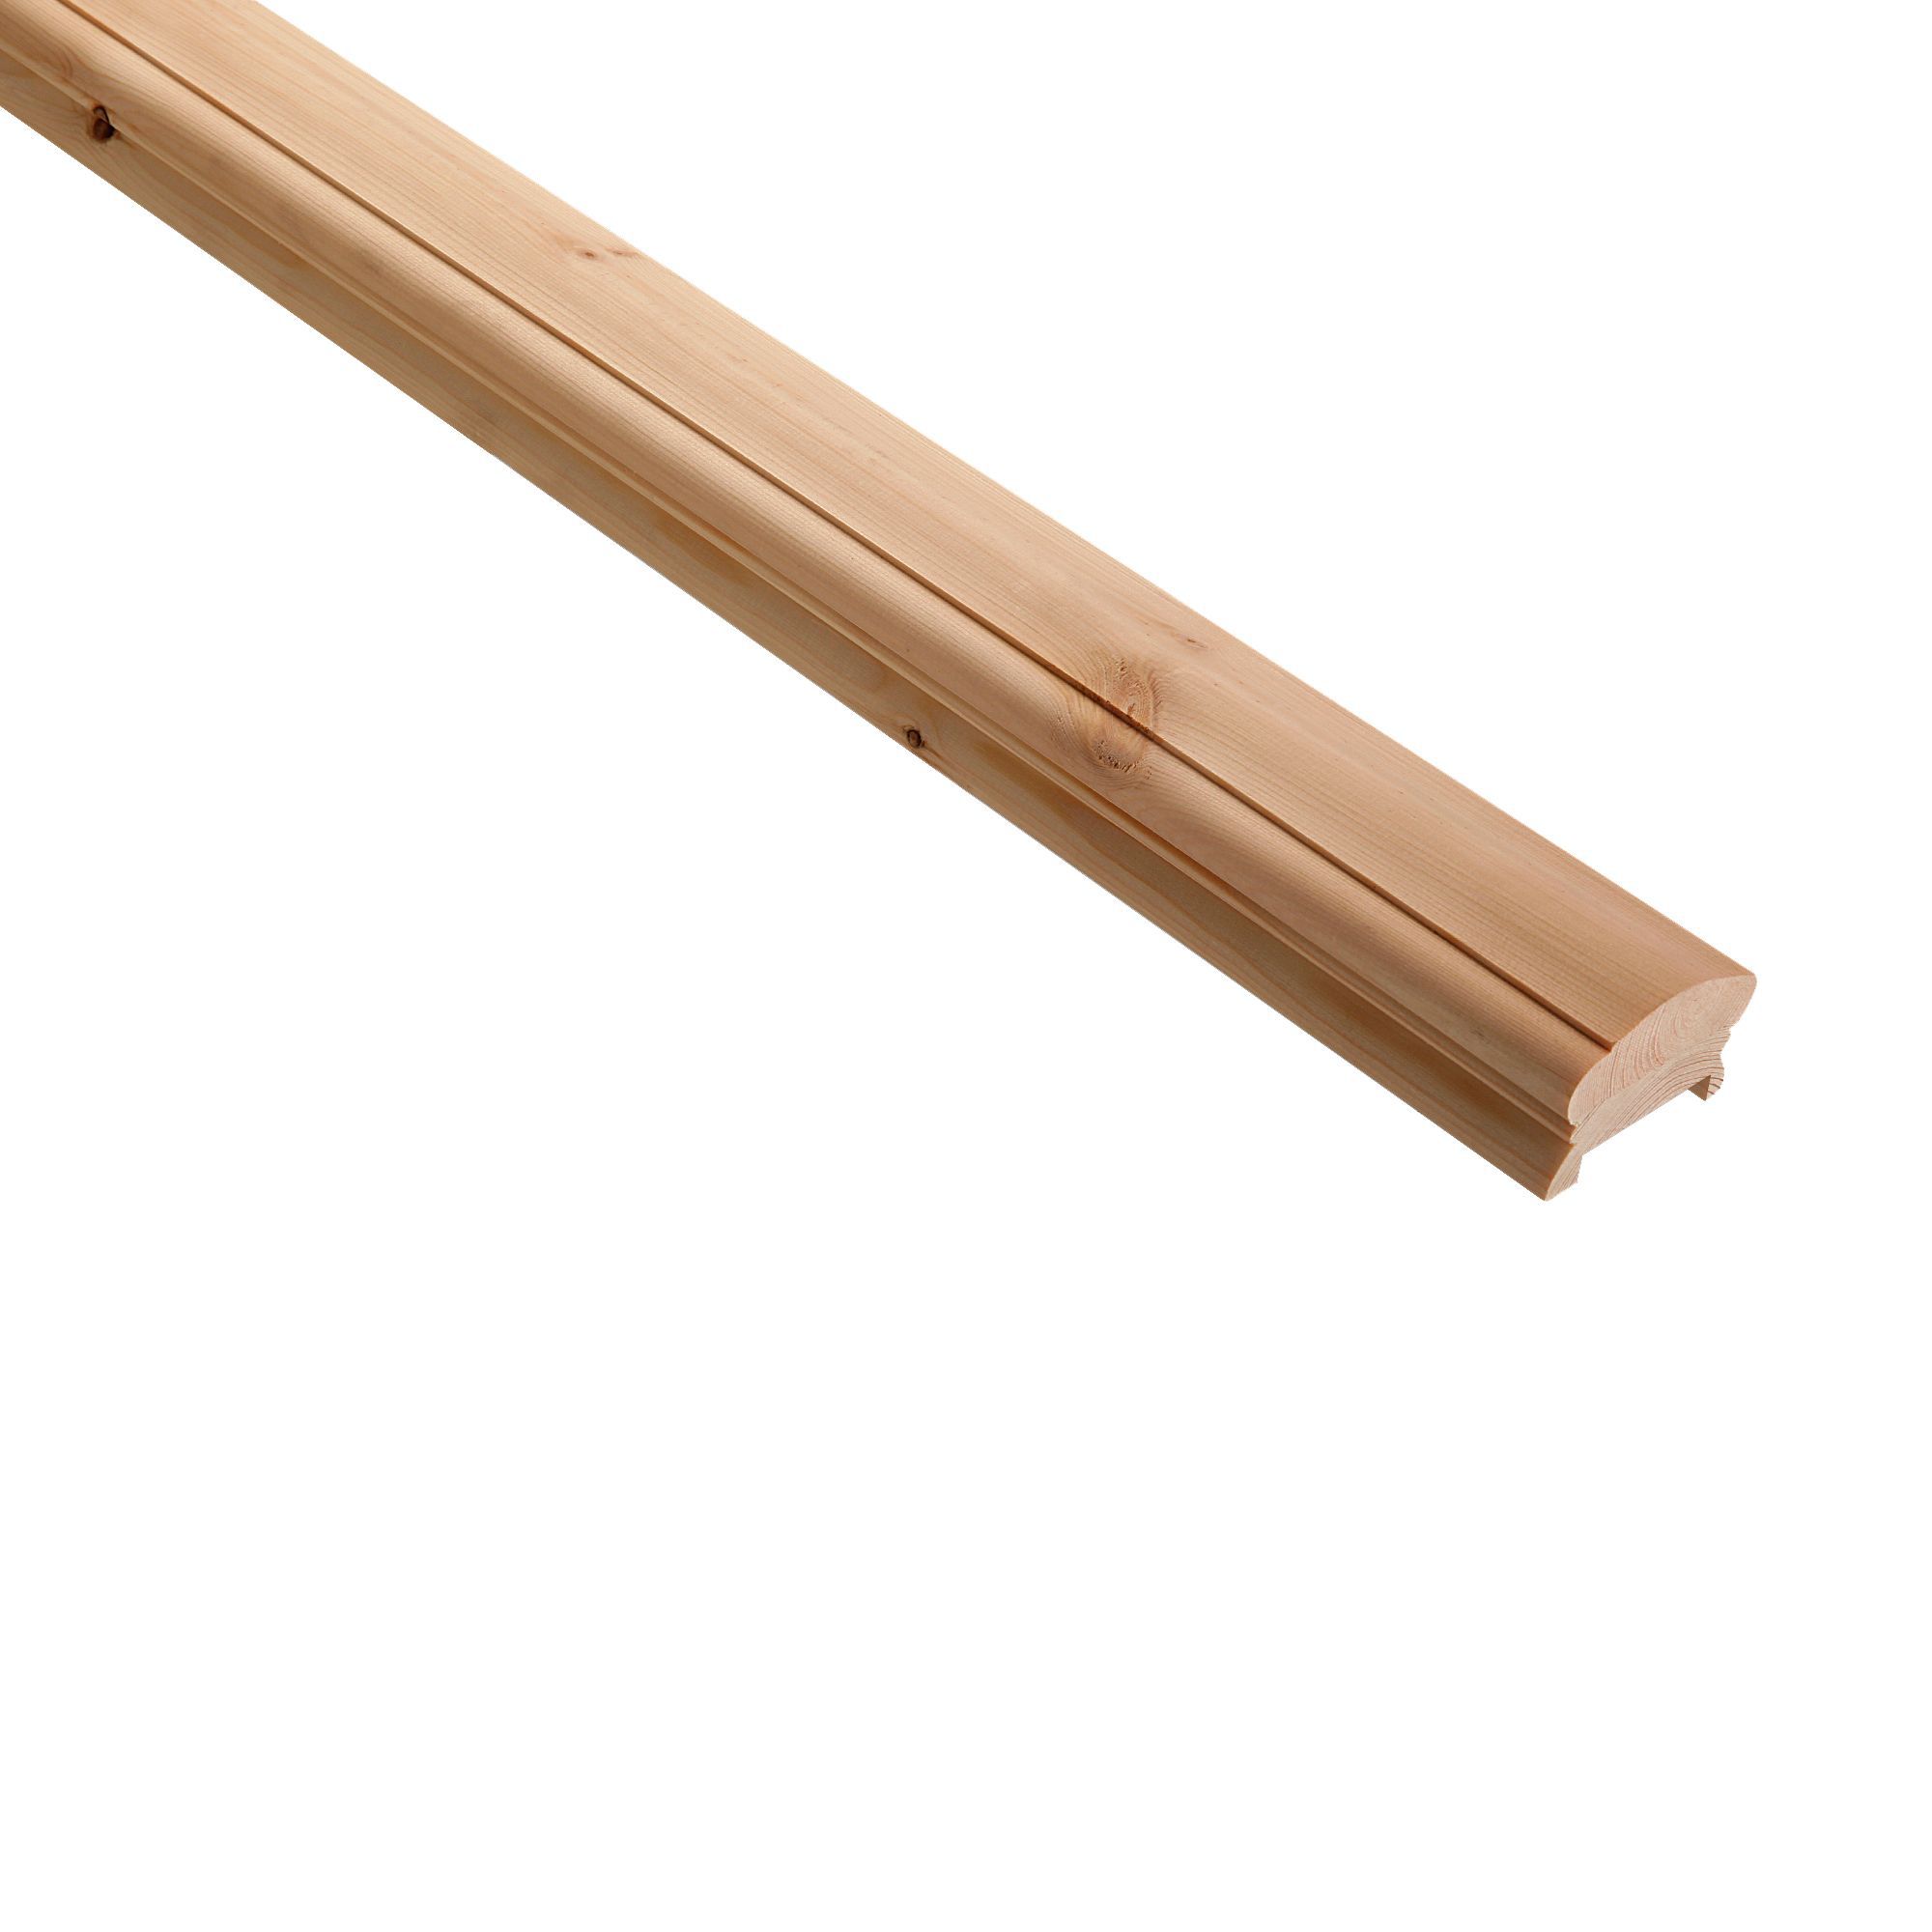 Cheshire Mouldings Traditional Pine 32mm Light handrail, (L)3.6m (W)41mm